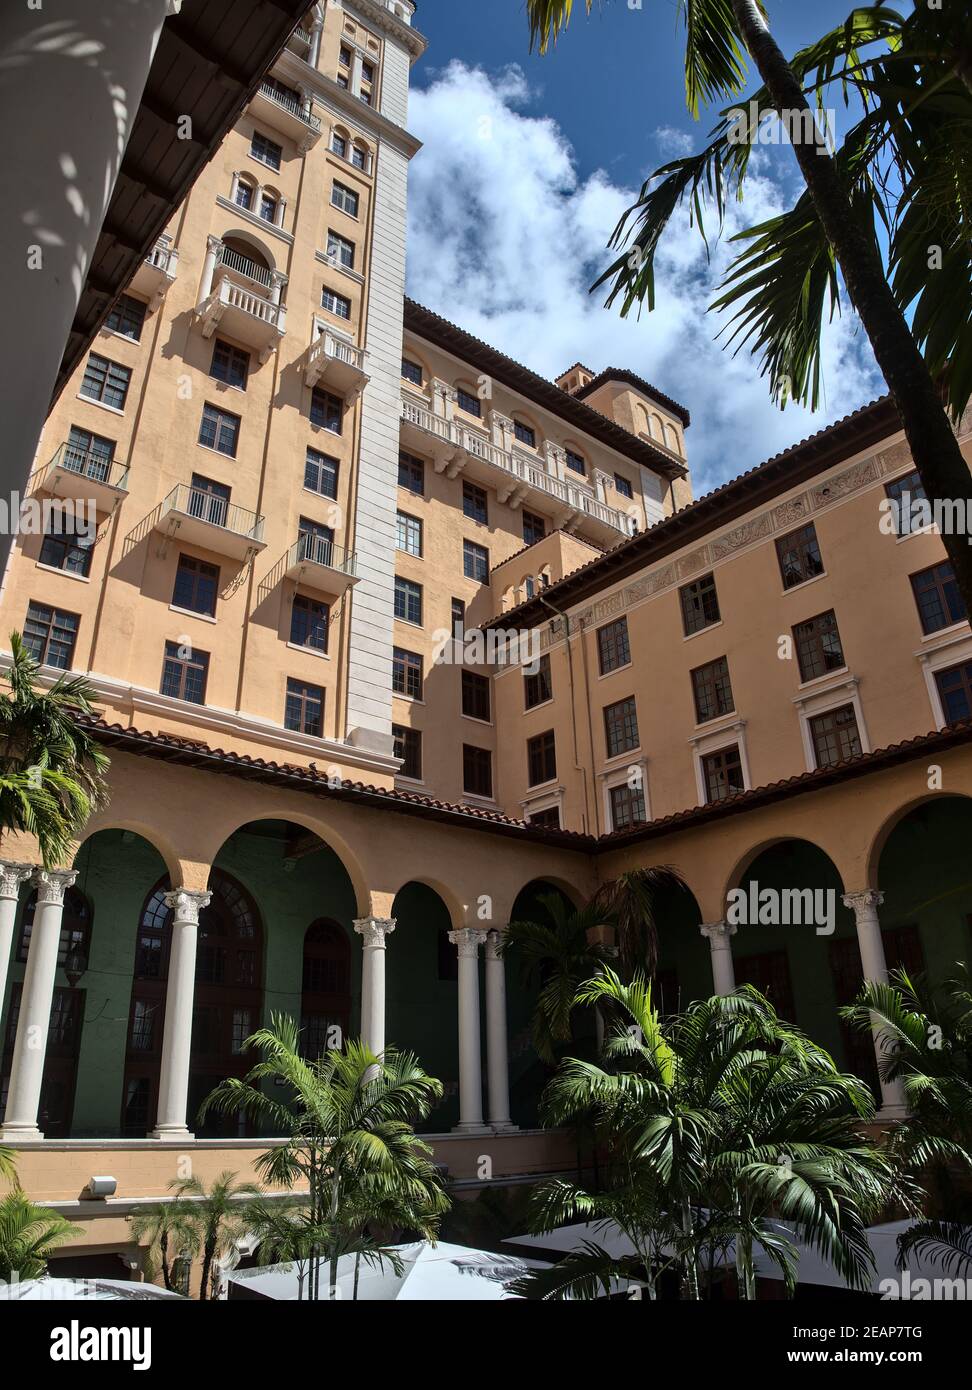 Coral Gables, Florida, USA - 2020: The Miami Biltmore Hotel, a historic luxury hotel built in 1926, designated a National Historic Landmark in 1996. Stock Photo